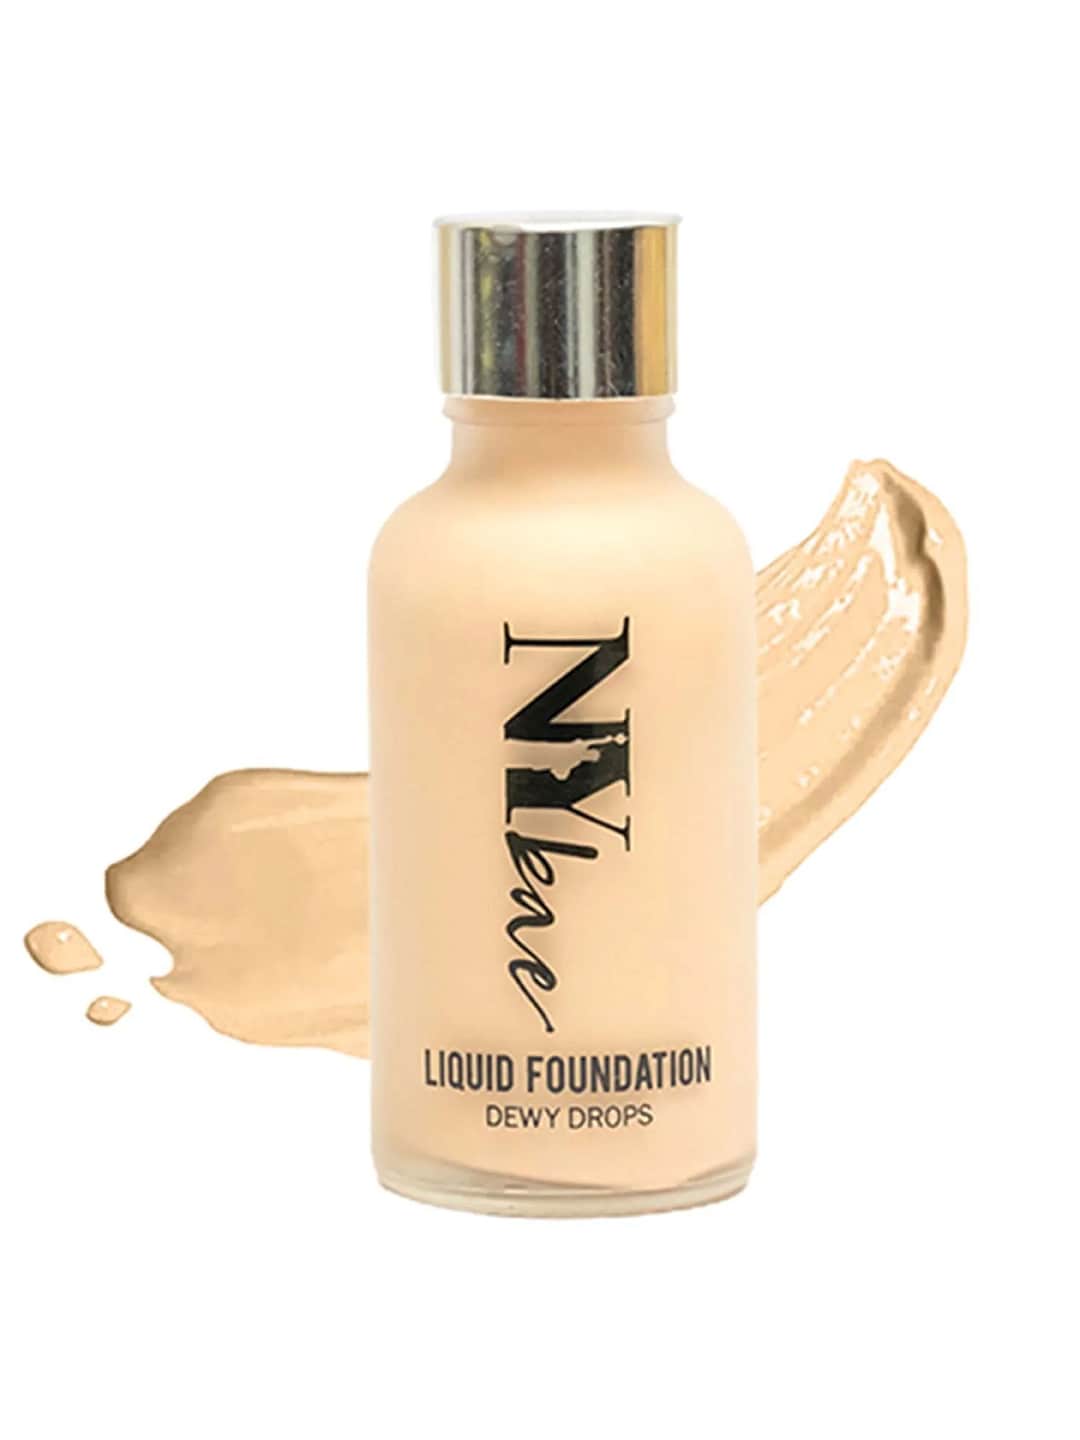 NY Bae Dewy Drops Liquid Foundation - White Coffee Price in India